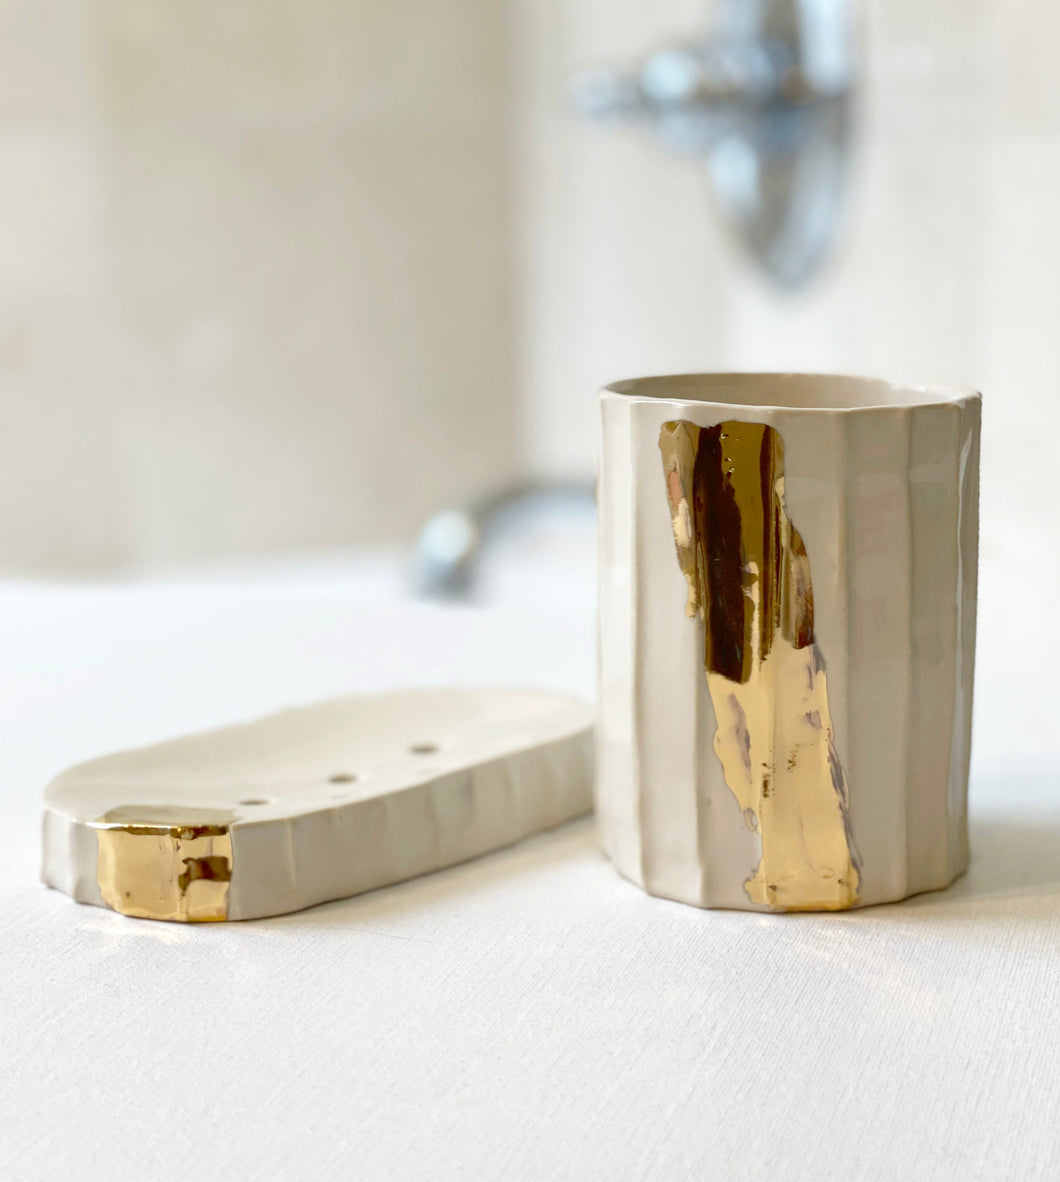 Bathroom set - soap dish + toothbrush pot / cup - luxury bathroom with 22k gold luster